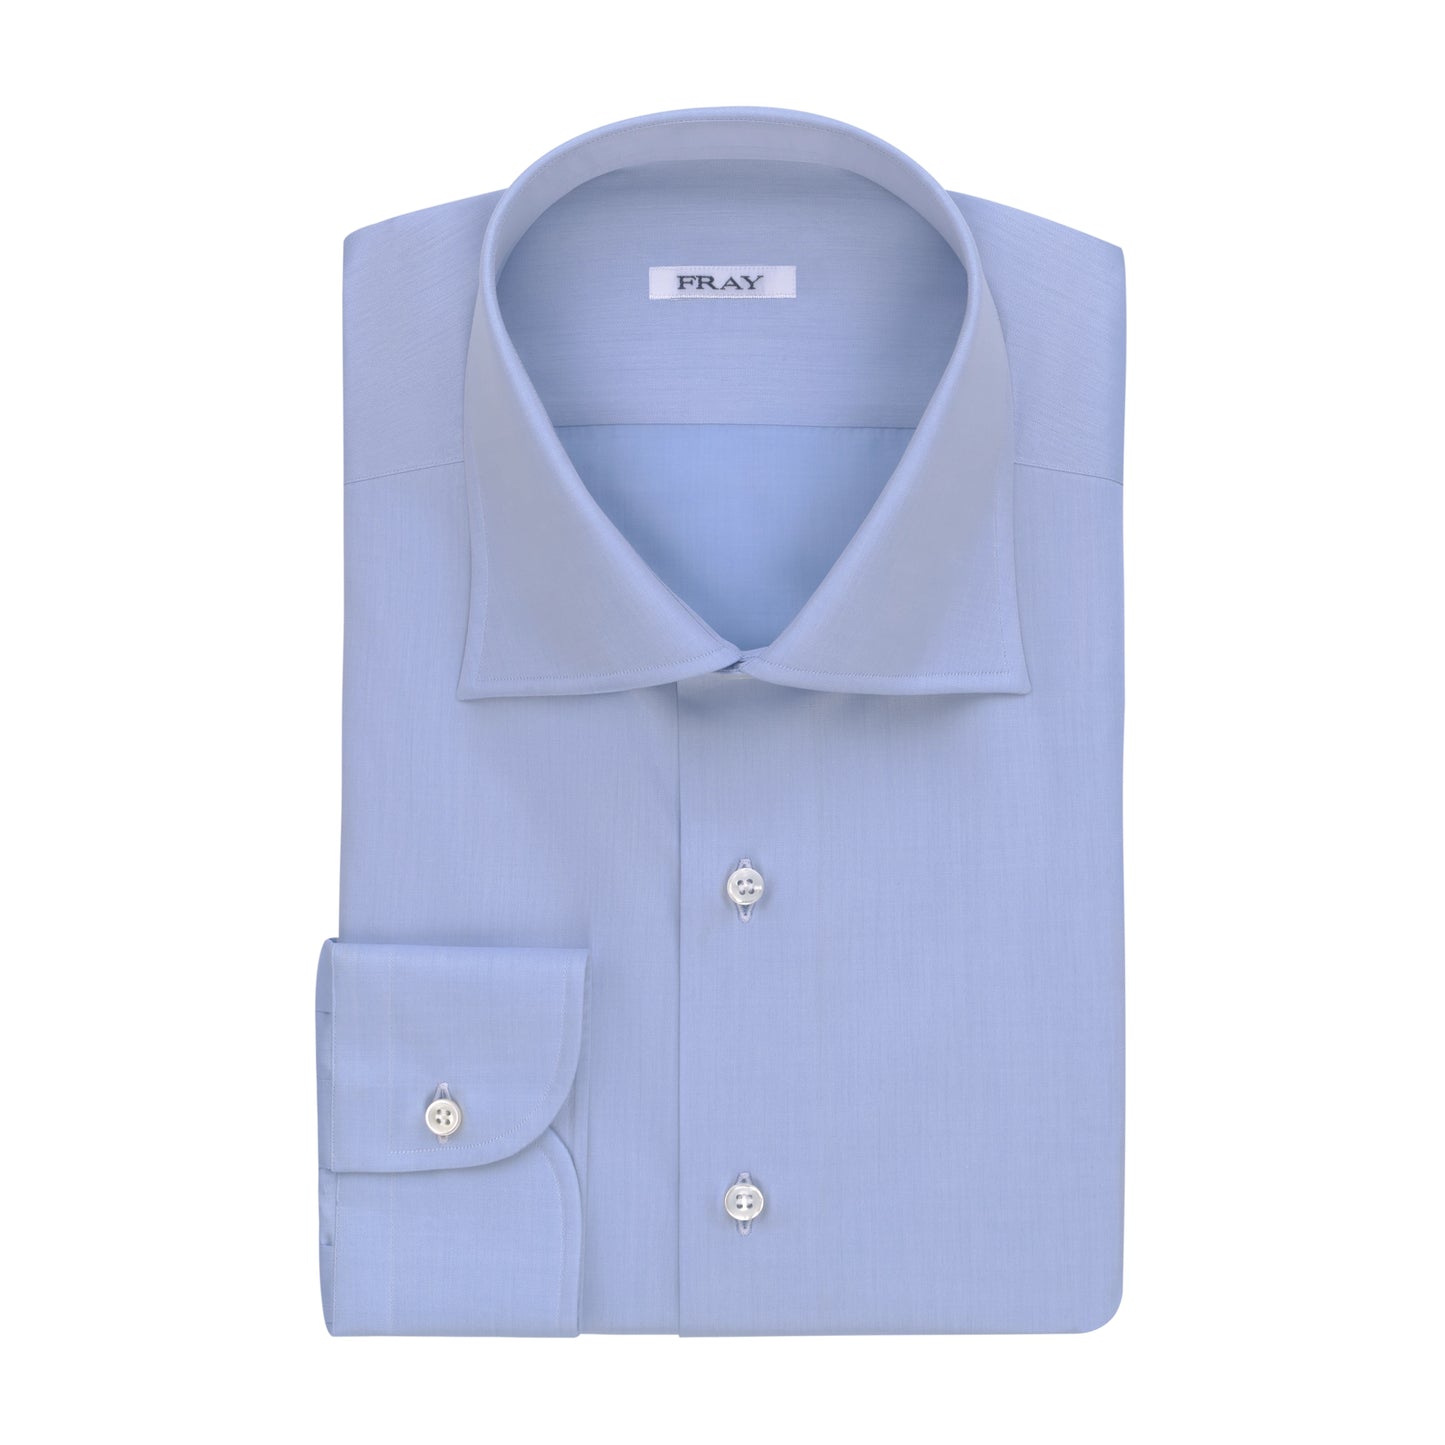 Classic Cotton Shirt in Light Blue with Spread Collar